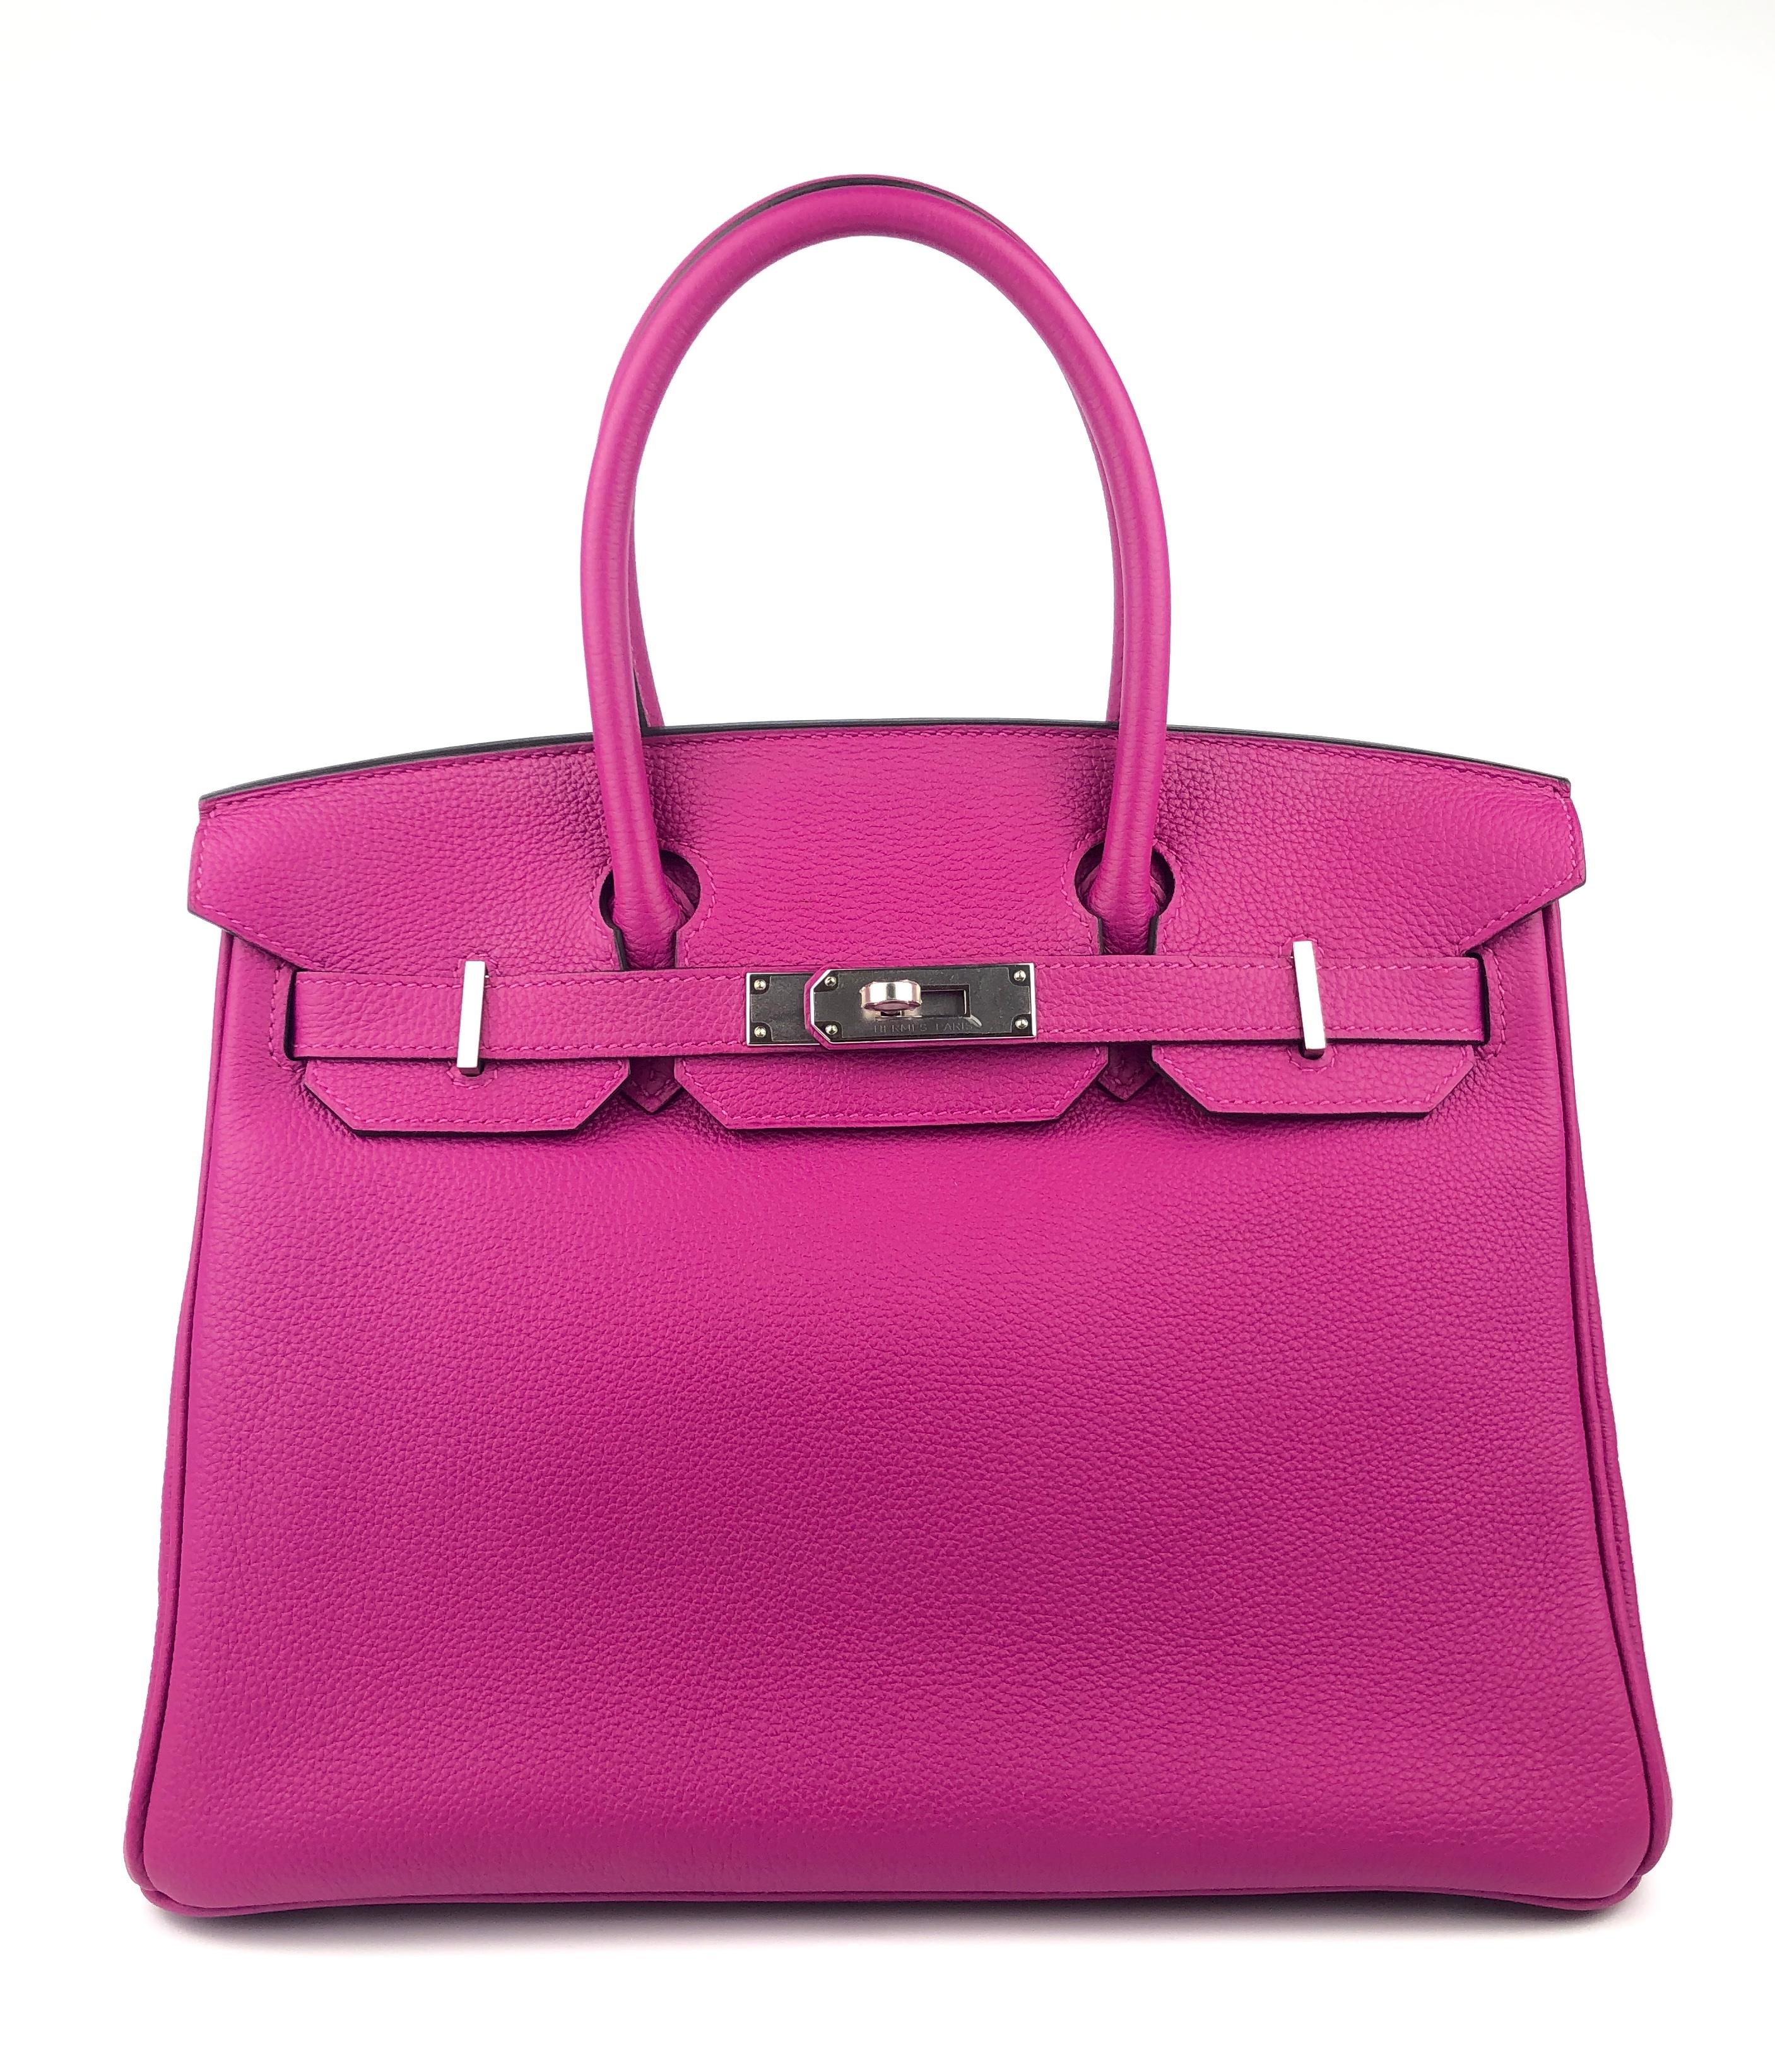 RARE Stunning Hermes Birkin 30 Rose Pourpre Pink Purple Palladium Hardware. Pristine Condition Plastic on Hardware. A Stamp 2017

Shop with Confidence from Lux Addicts. Authenticity Guaranteed!